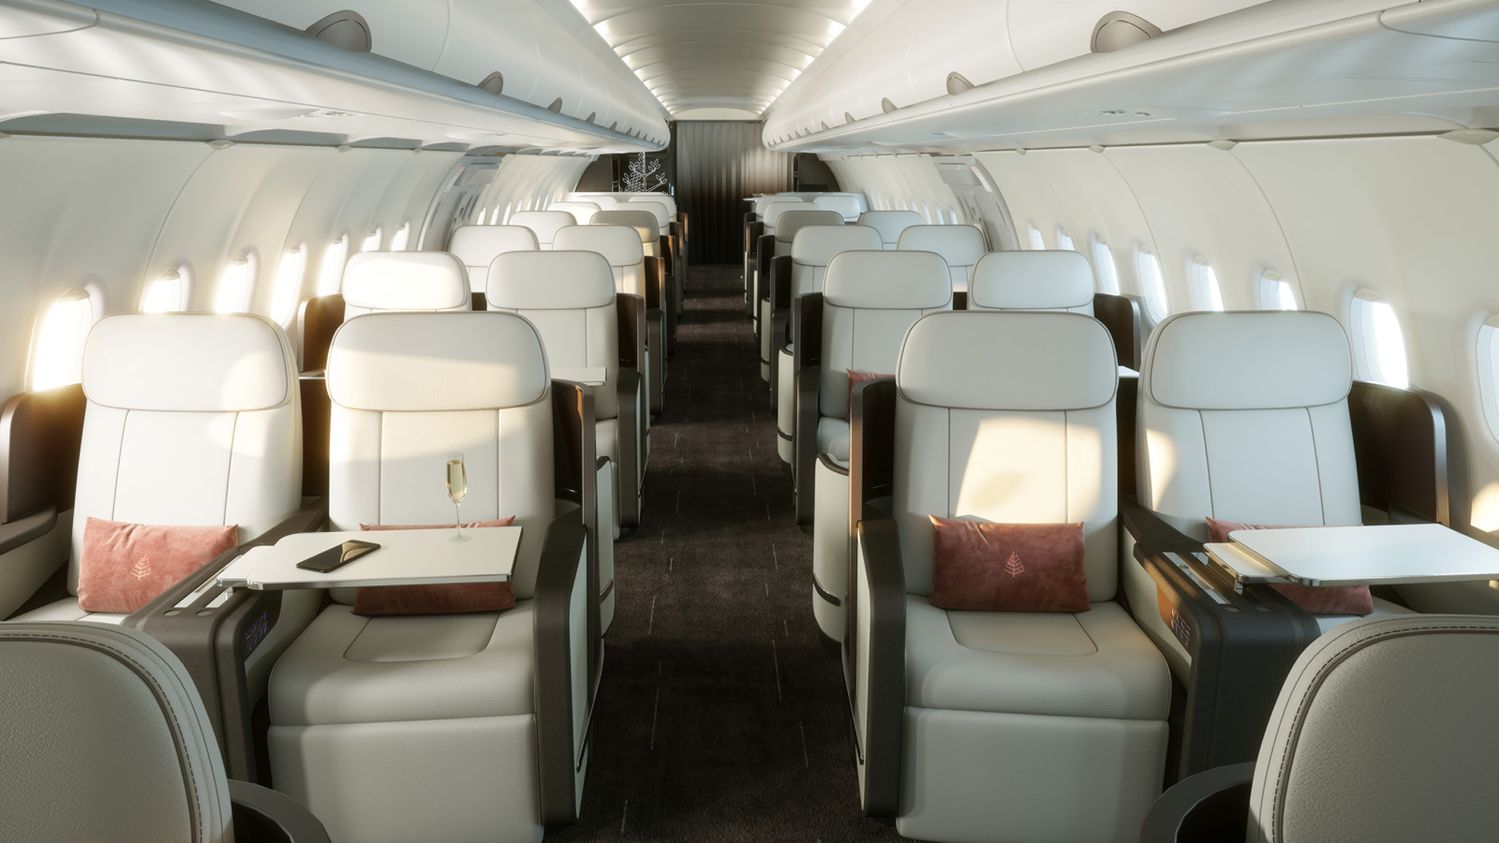 The 'all-business class' Airbus A321LR will begin round-the-world trips in early 2021 and be fitted with 48 luxurious seats clad in leather from Italian producer Poltrona Frau.